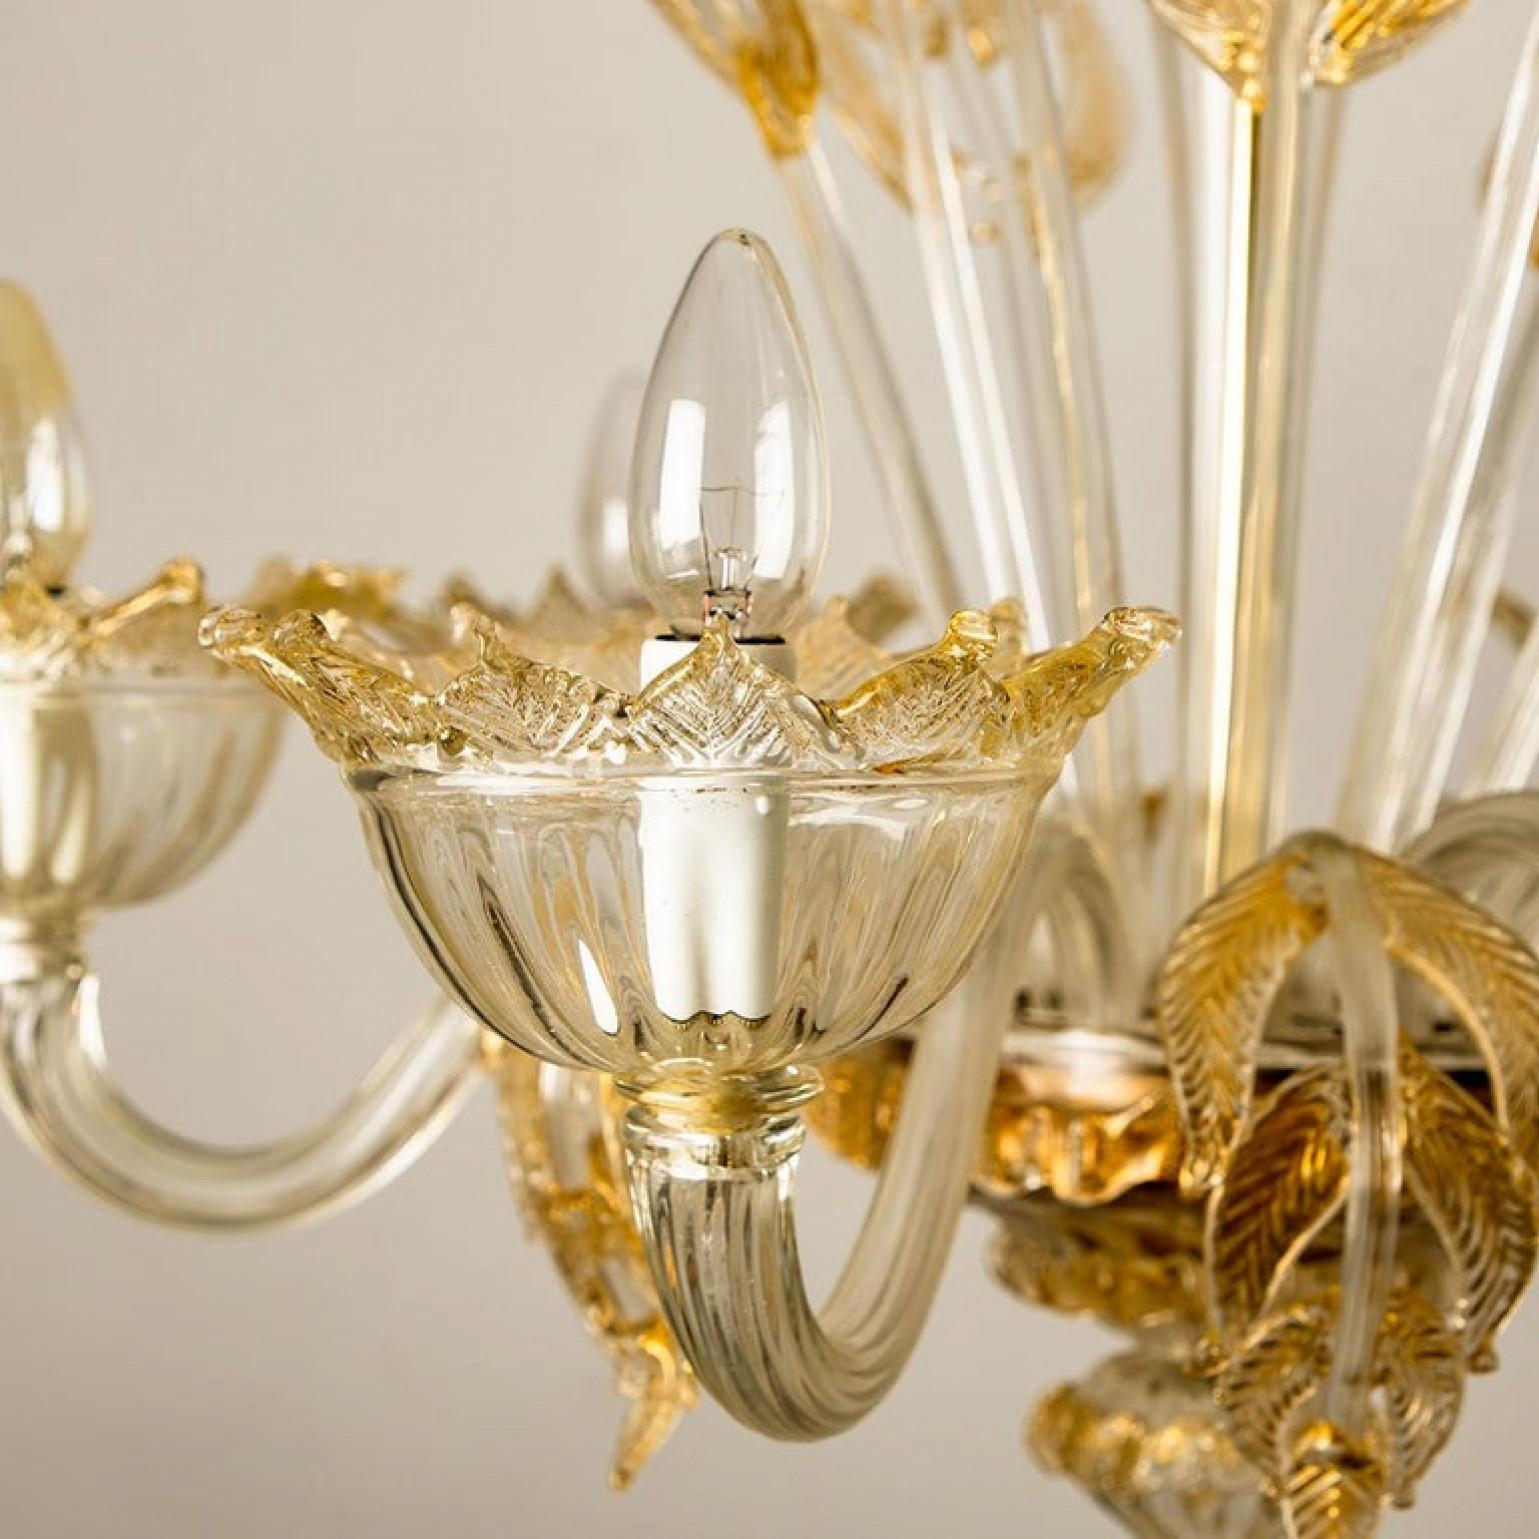 Brass Large Venetian Chandelier in Gilded Murano Glass, by Barovier, 1950s For Sale